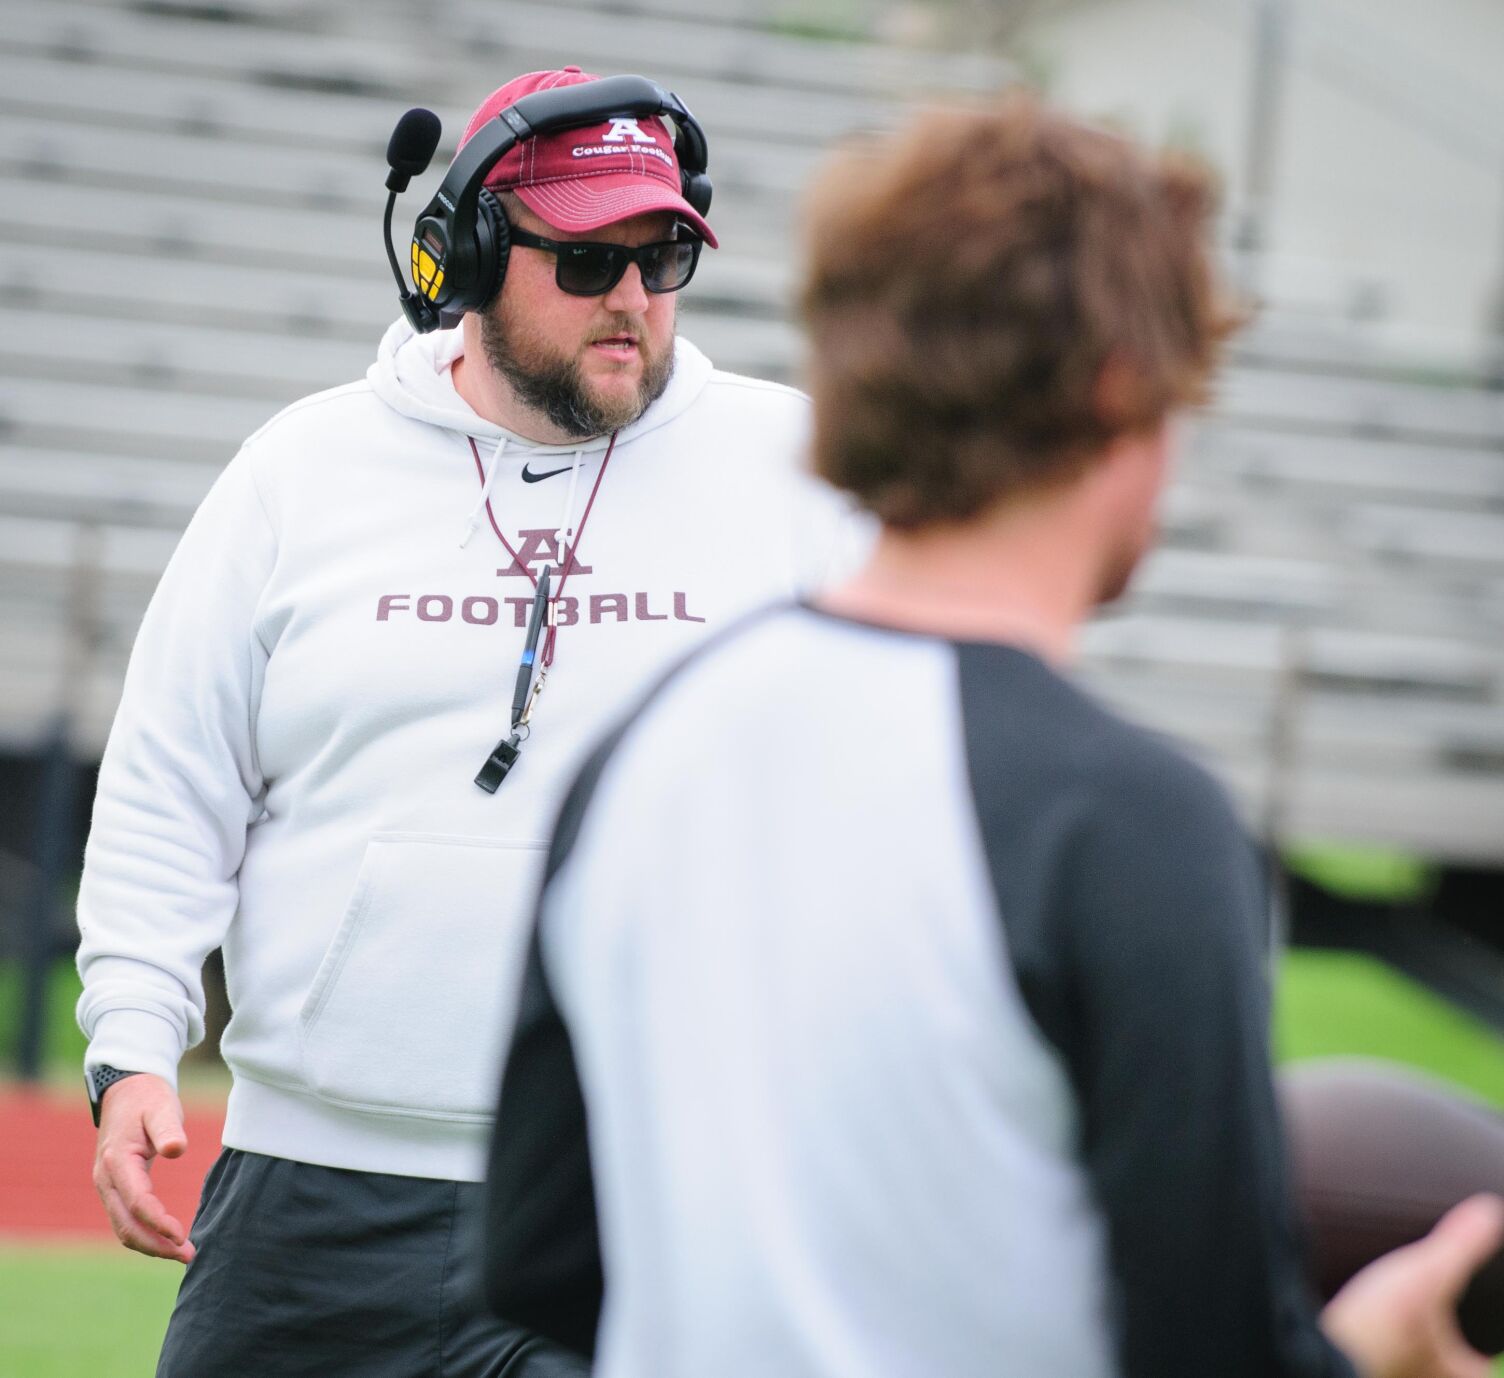 Chad Roark: From All-State Center to Ada High’s Defensive Coordinator